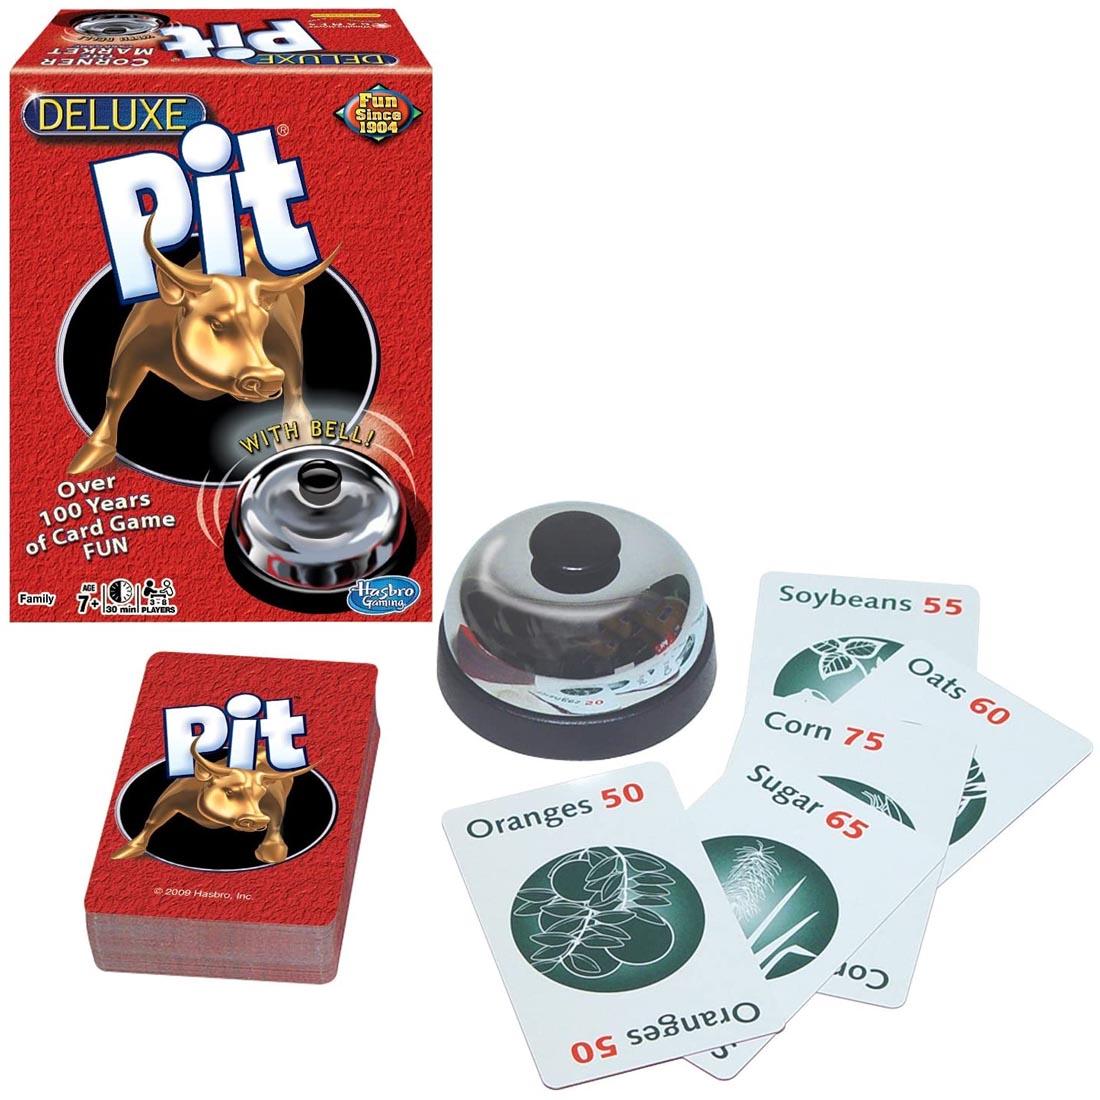 box and contents of Deluxe Pit Card Game with cards and bell